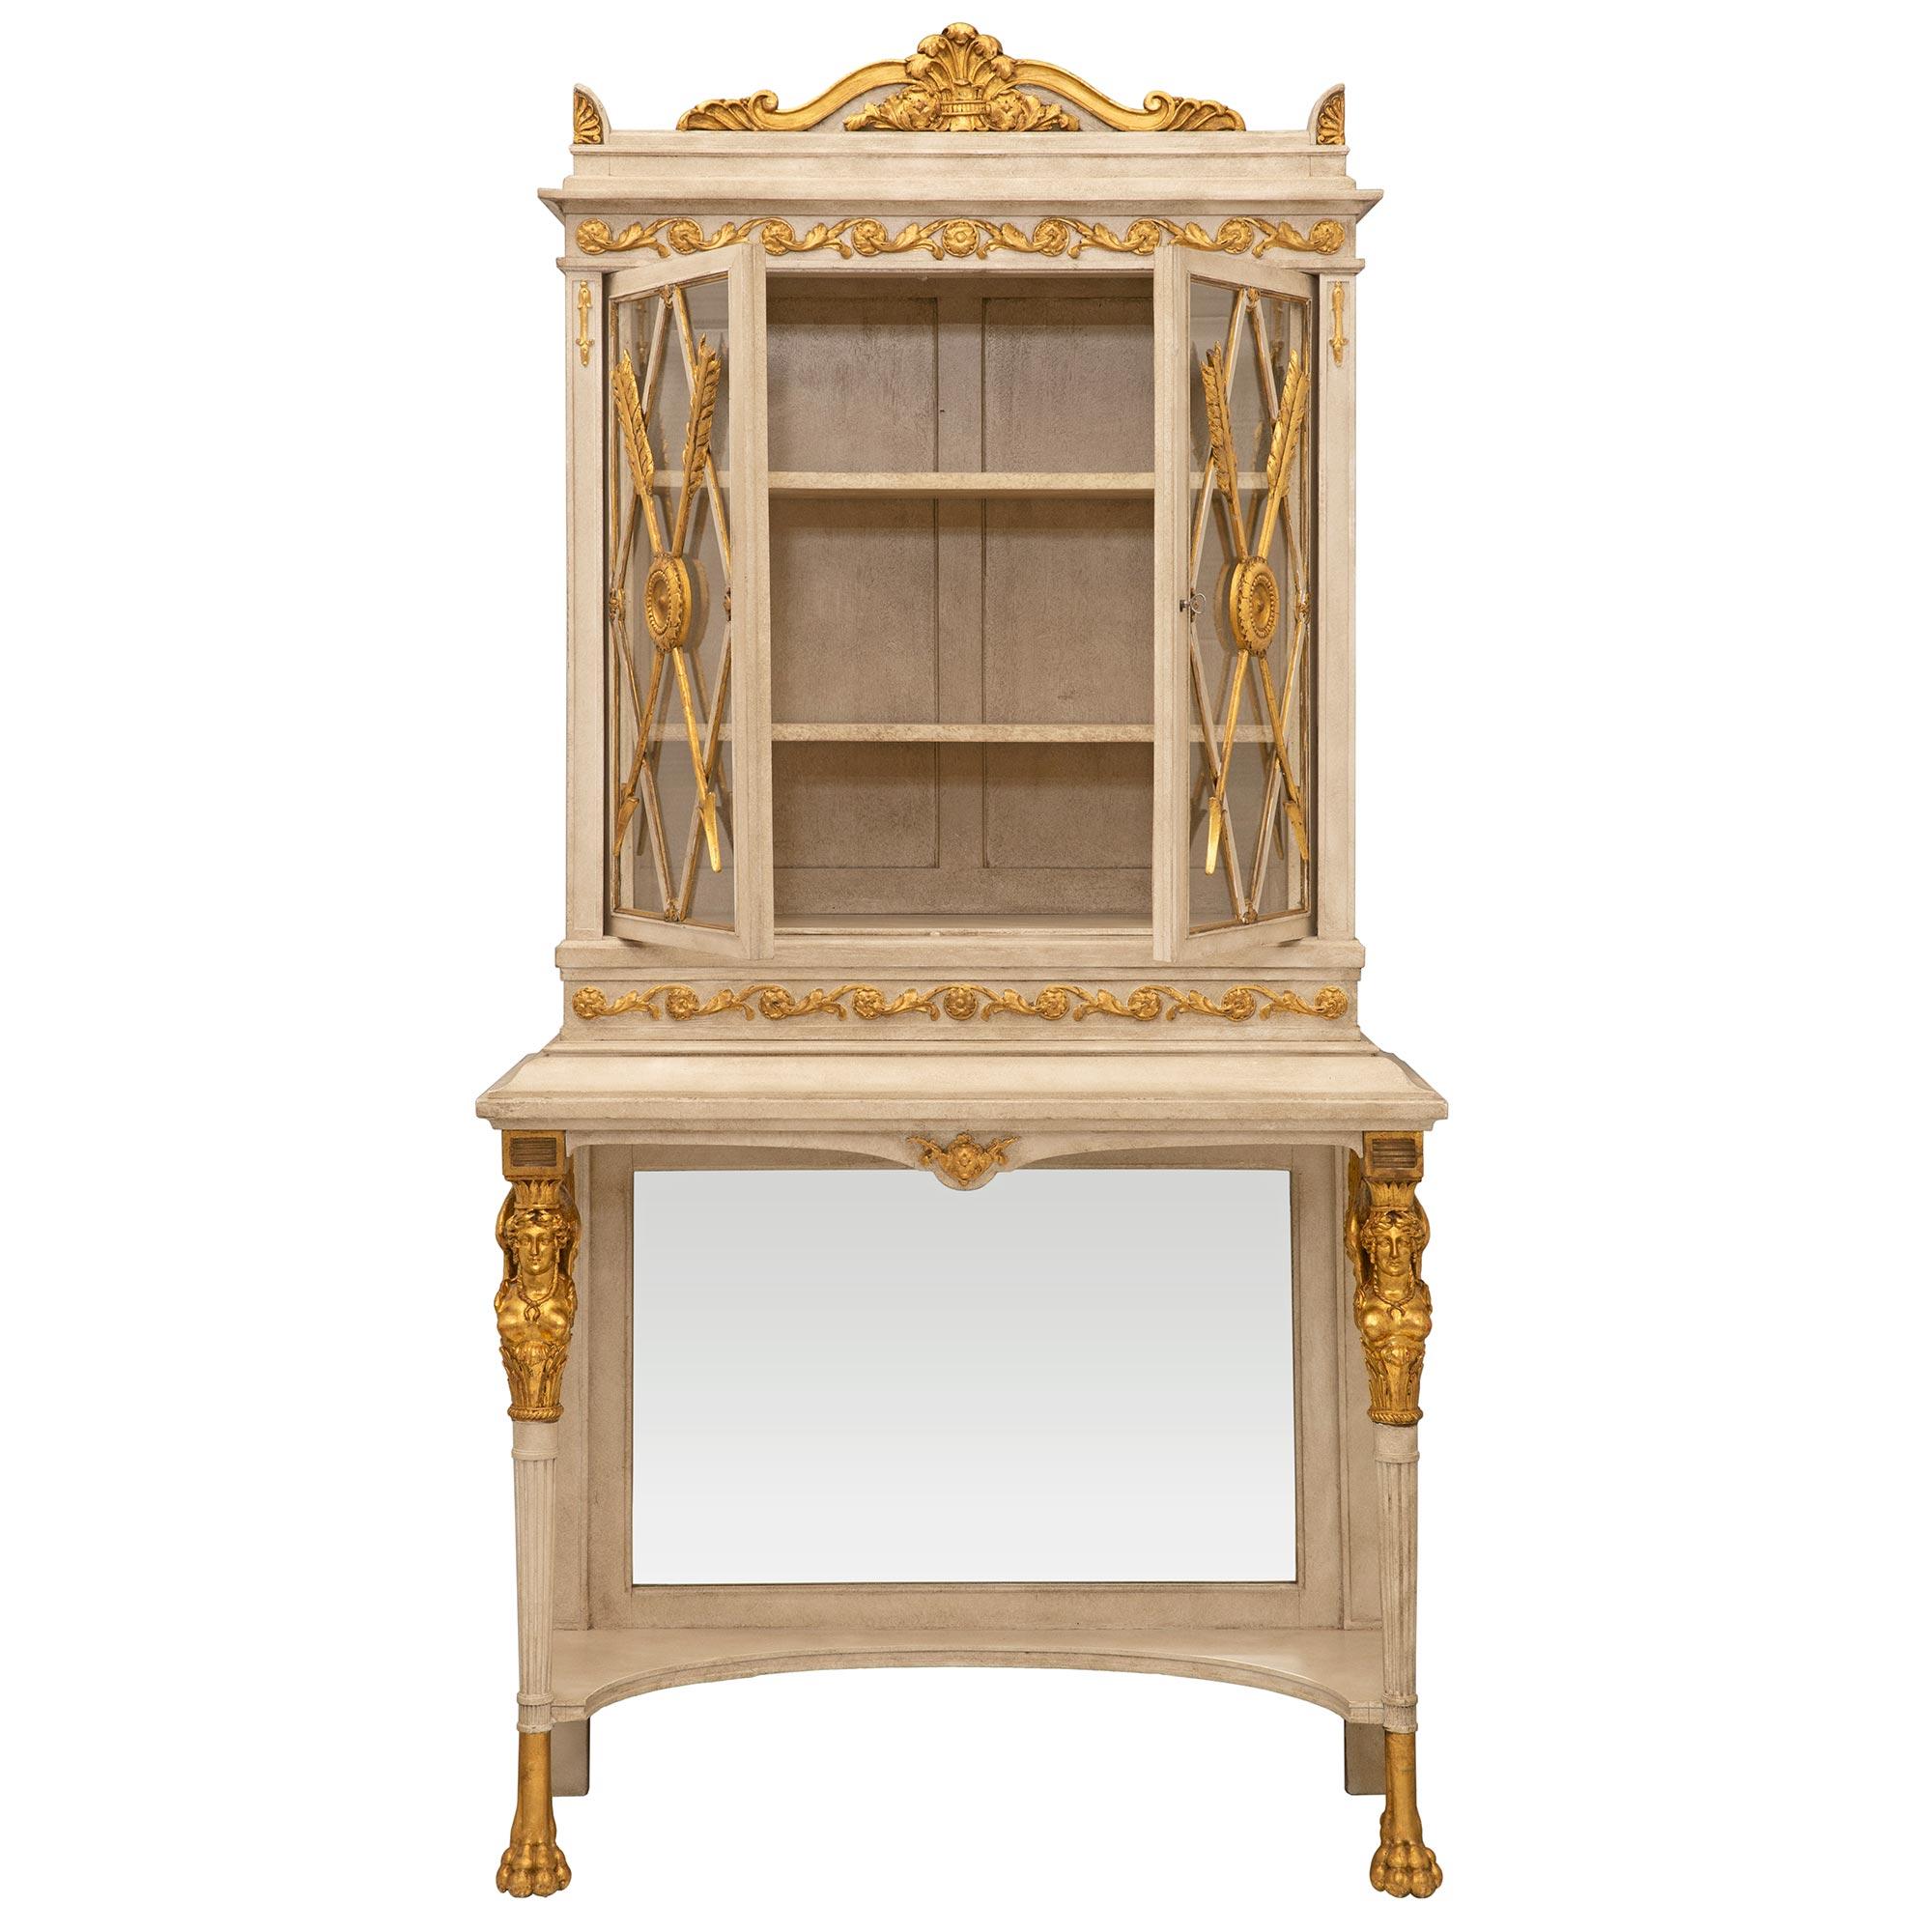 A beautiful and most elegant Italian 19th century Neo-Classical st. patinated and giltwood cabinet vitrine. The vitrine is raised by circular tapered fluted legs with handsome giltwood paw feet, striking richly carved winged caryatids with crowns,